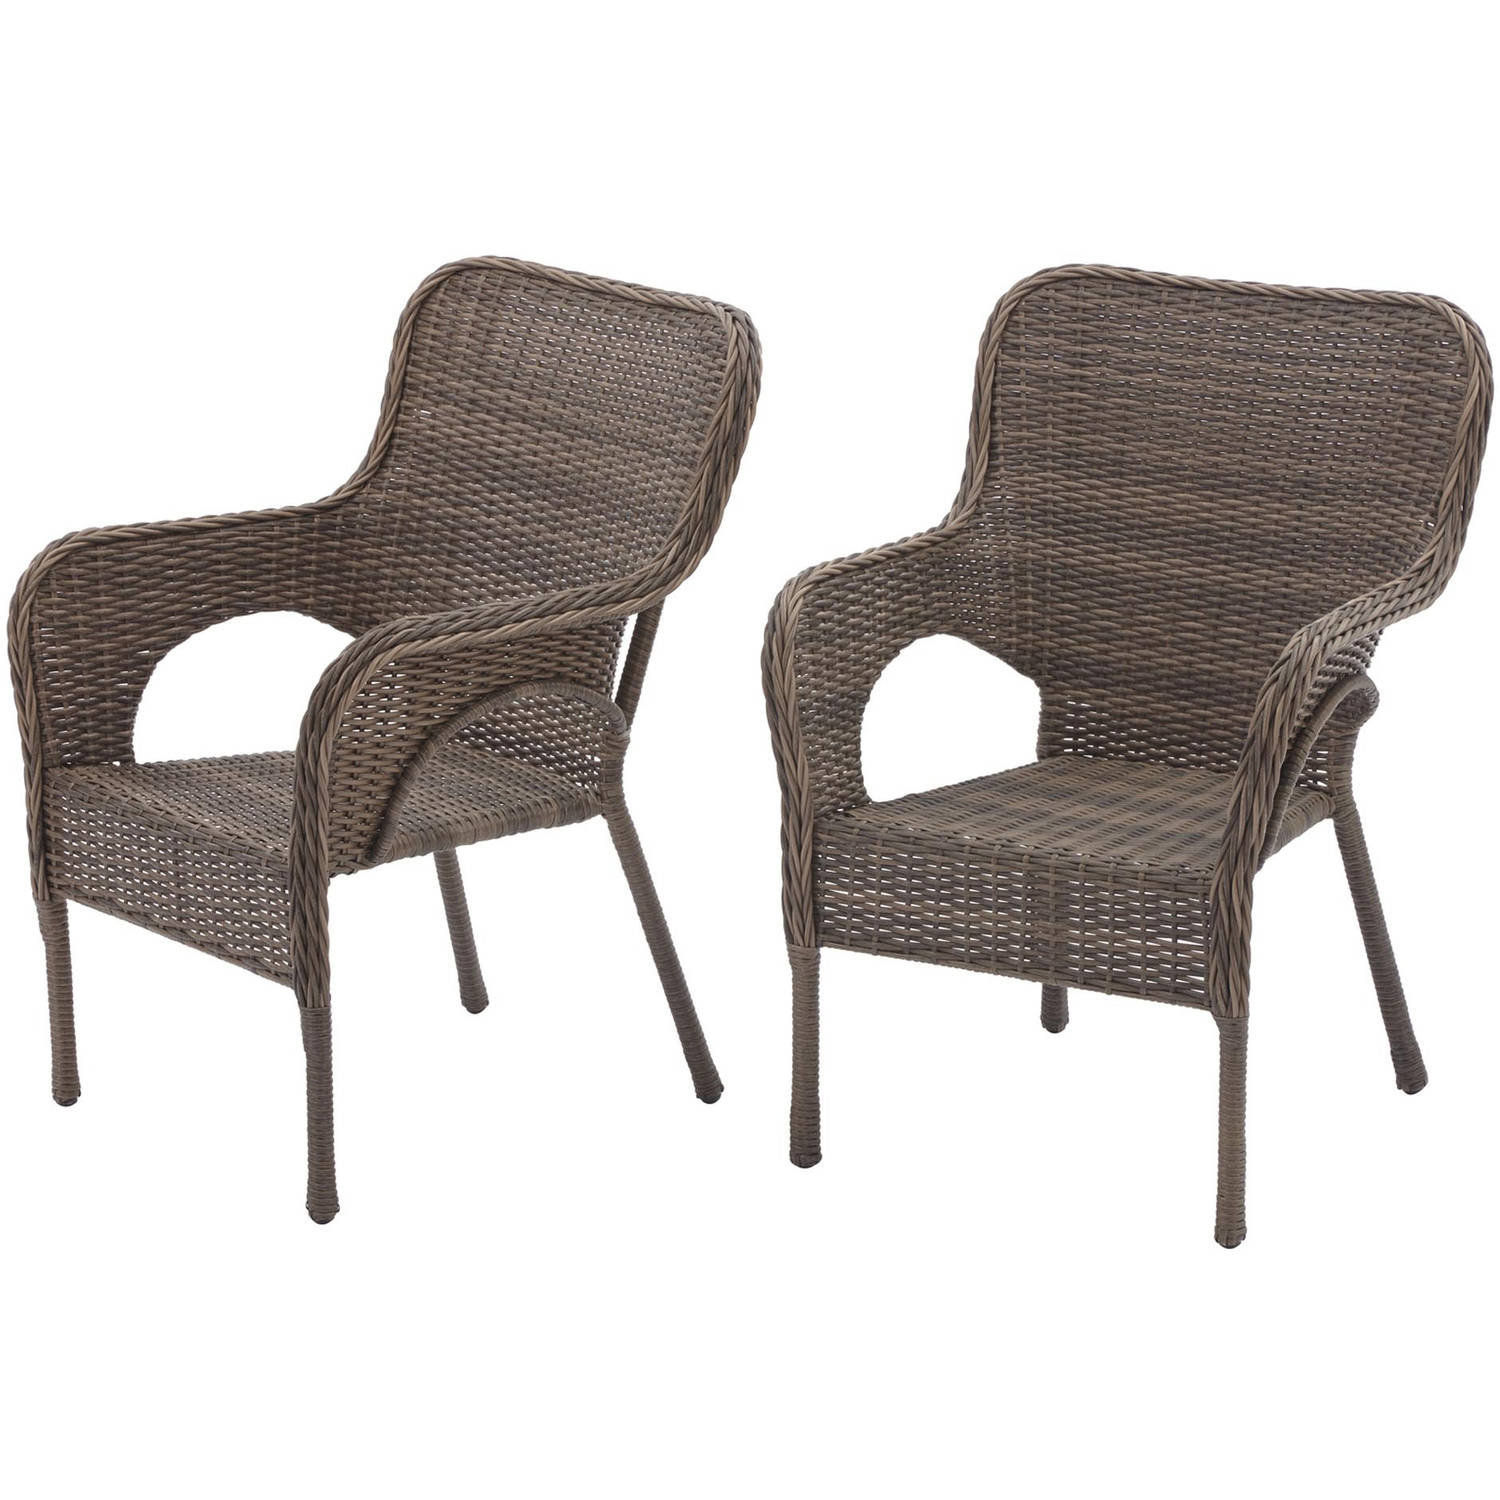 outdoor table and chairs patio furniture - walmart.com FGEJJLH